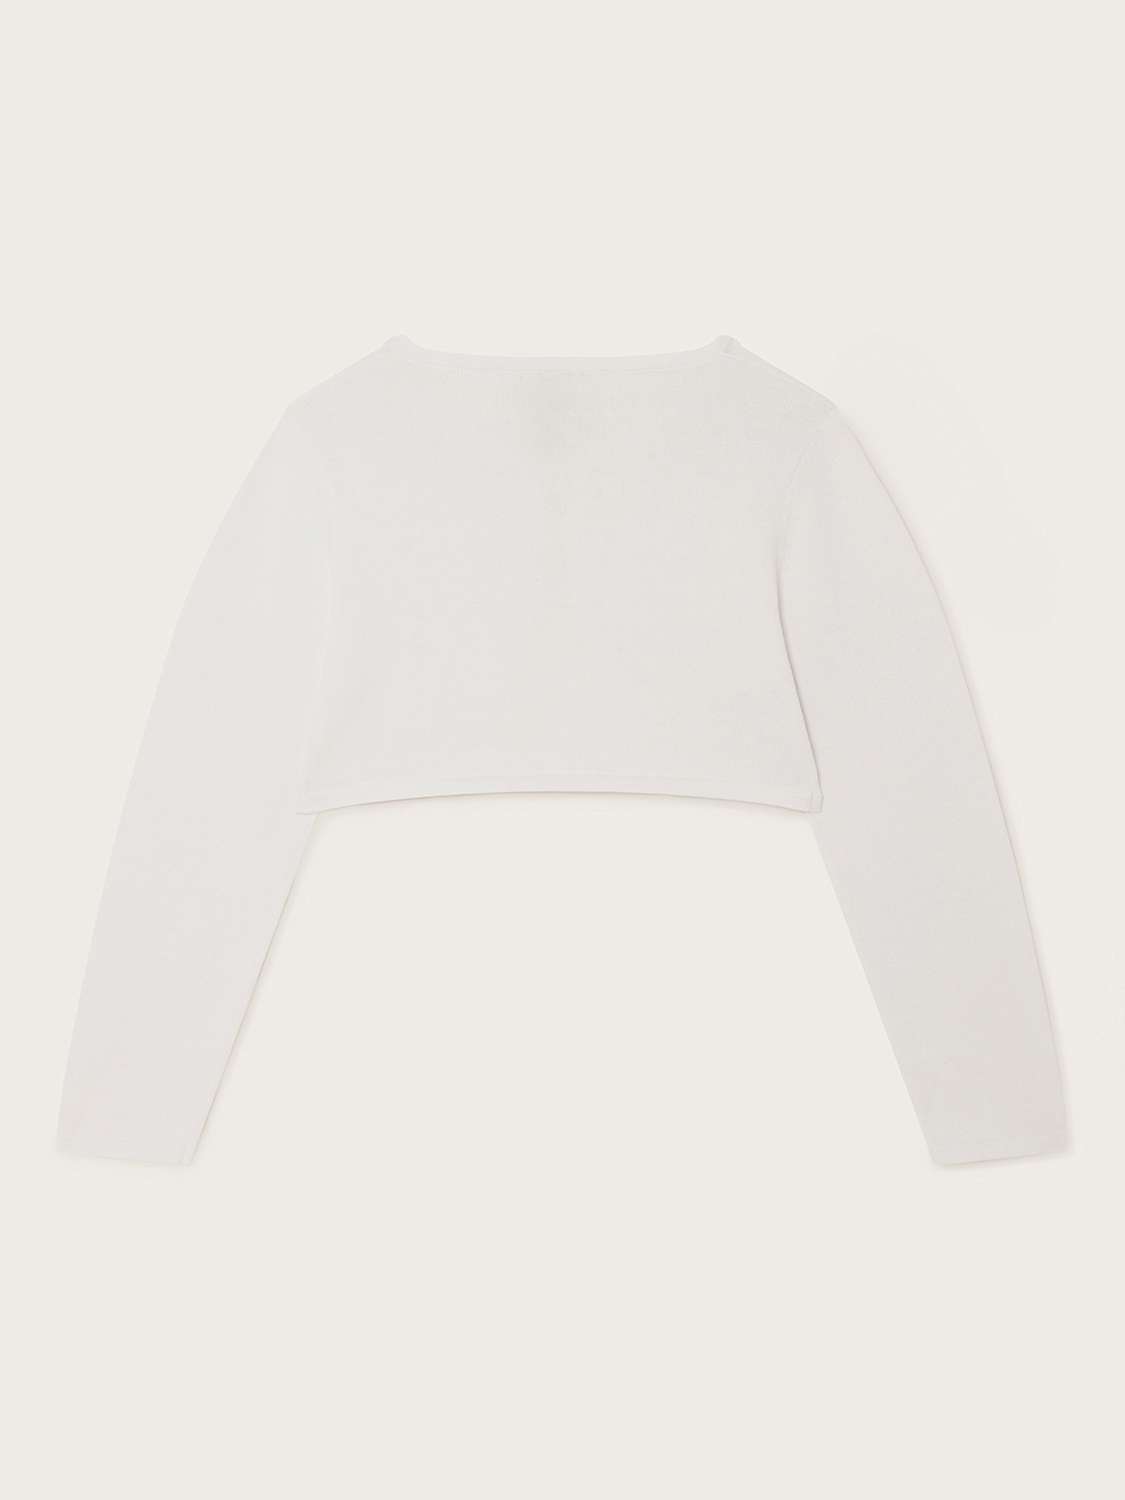 Buy Monsoon Kids' Scatter Pearl Cotton Cardigan, White Online at johnlewis.com